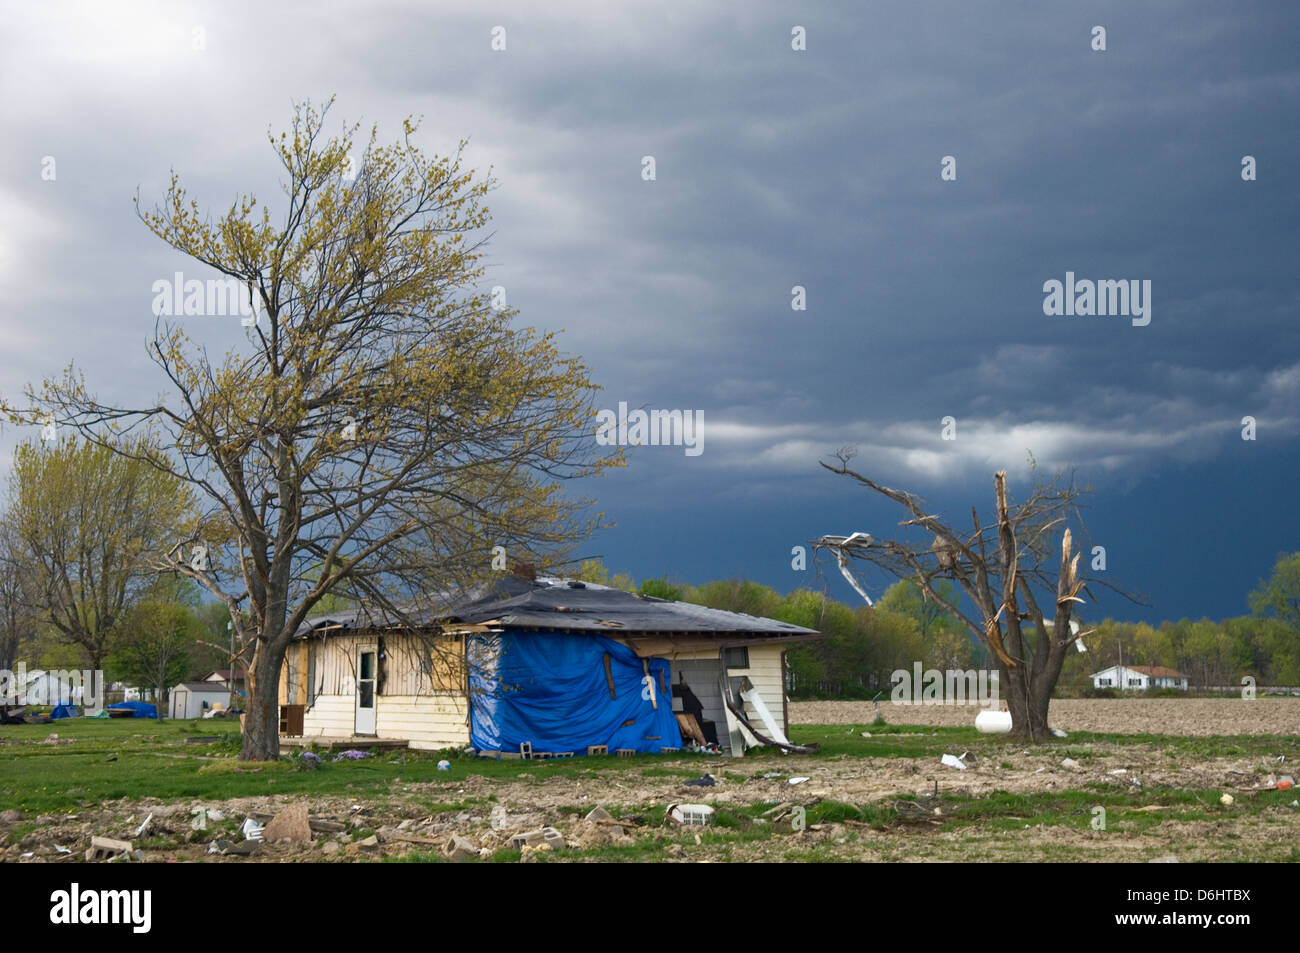 Storm Clouds Over Home Damaged By March 2 2012 Tornado in Holton, Indiana Stock Photo